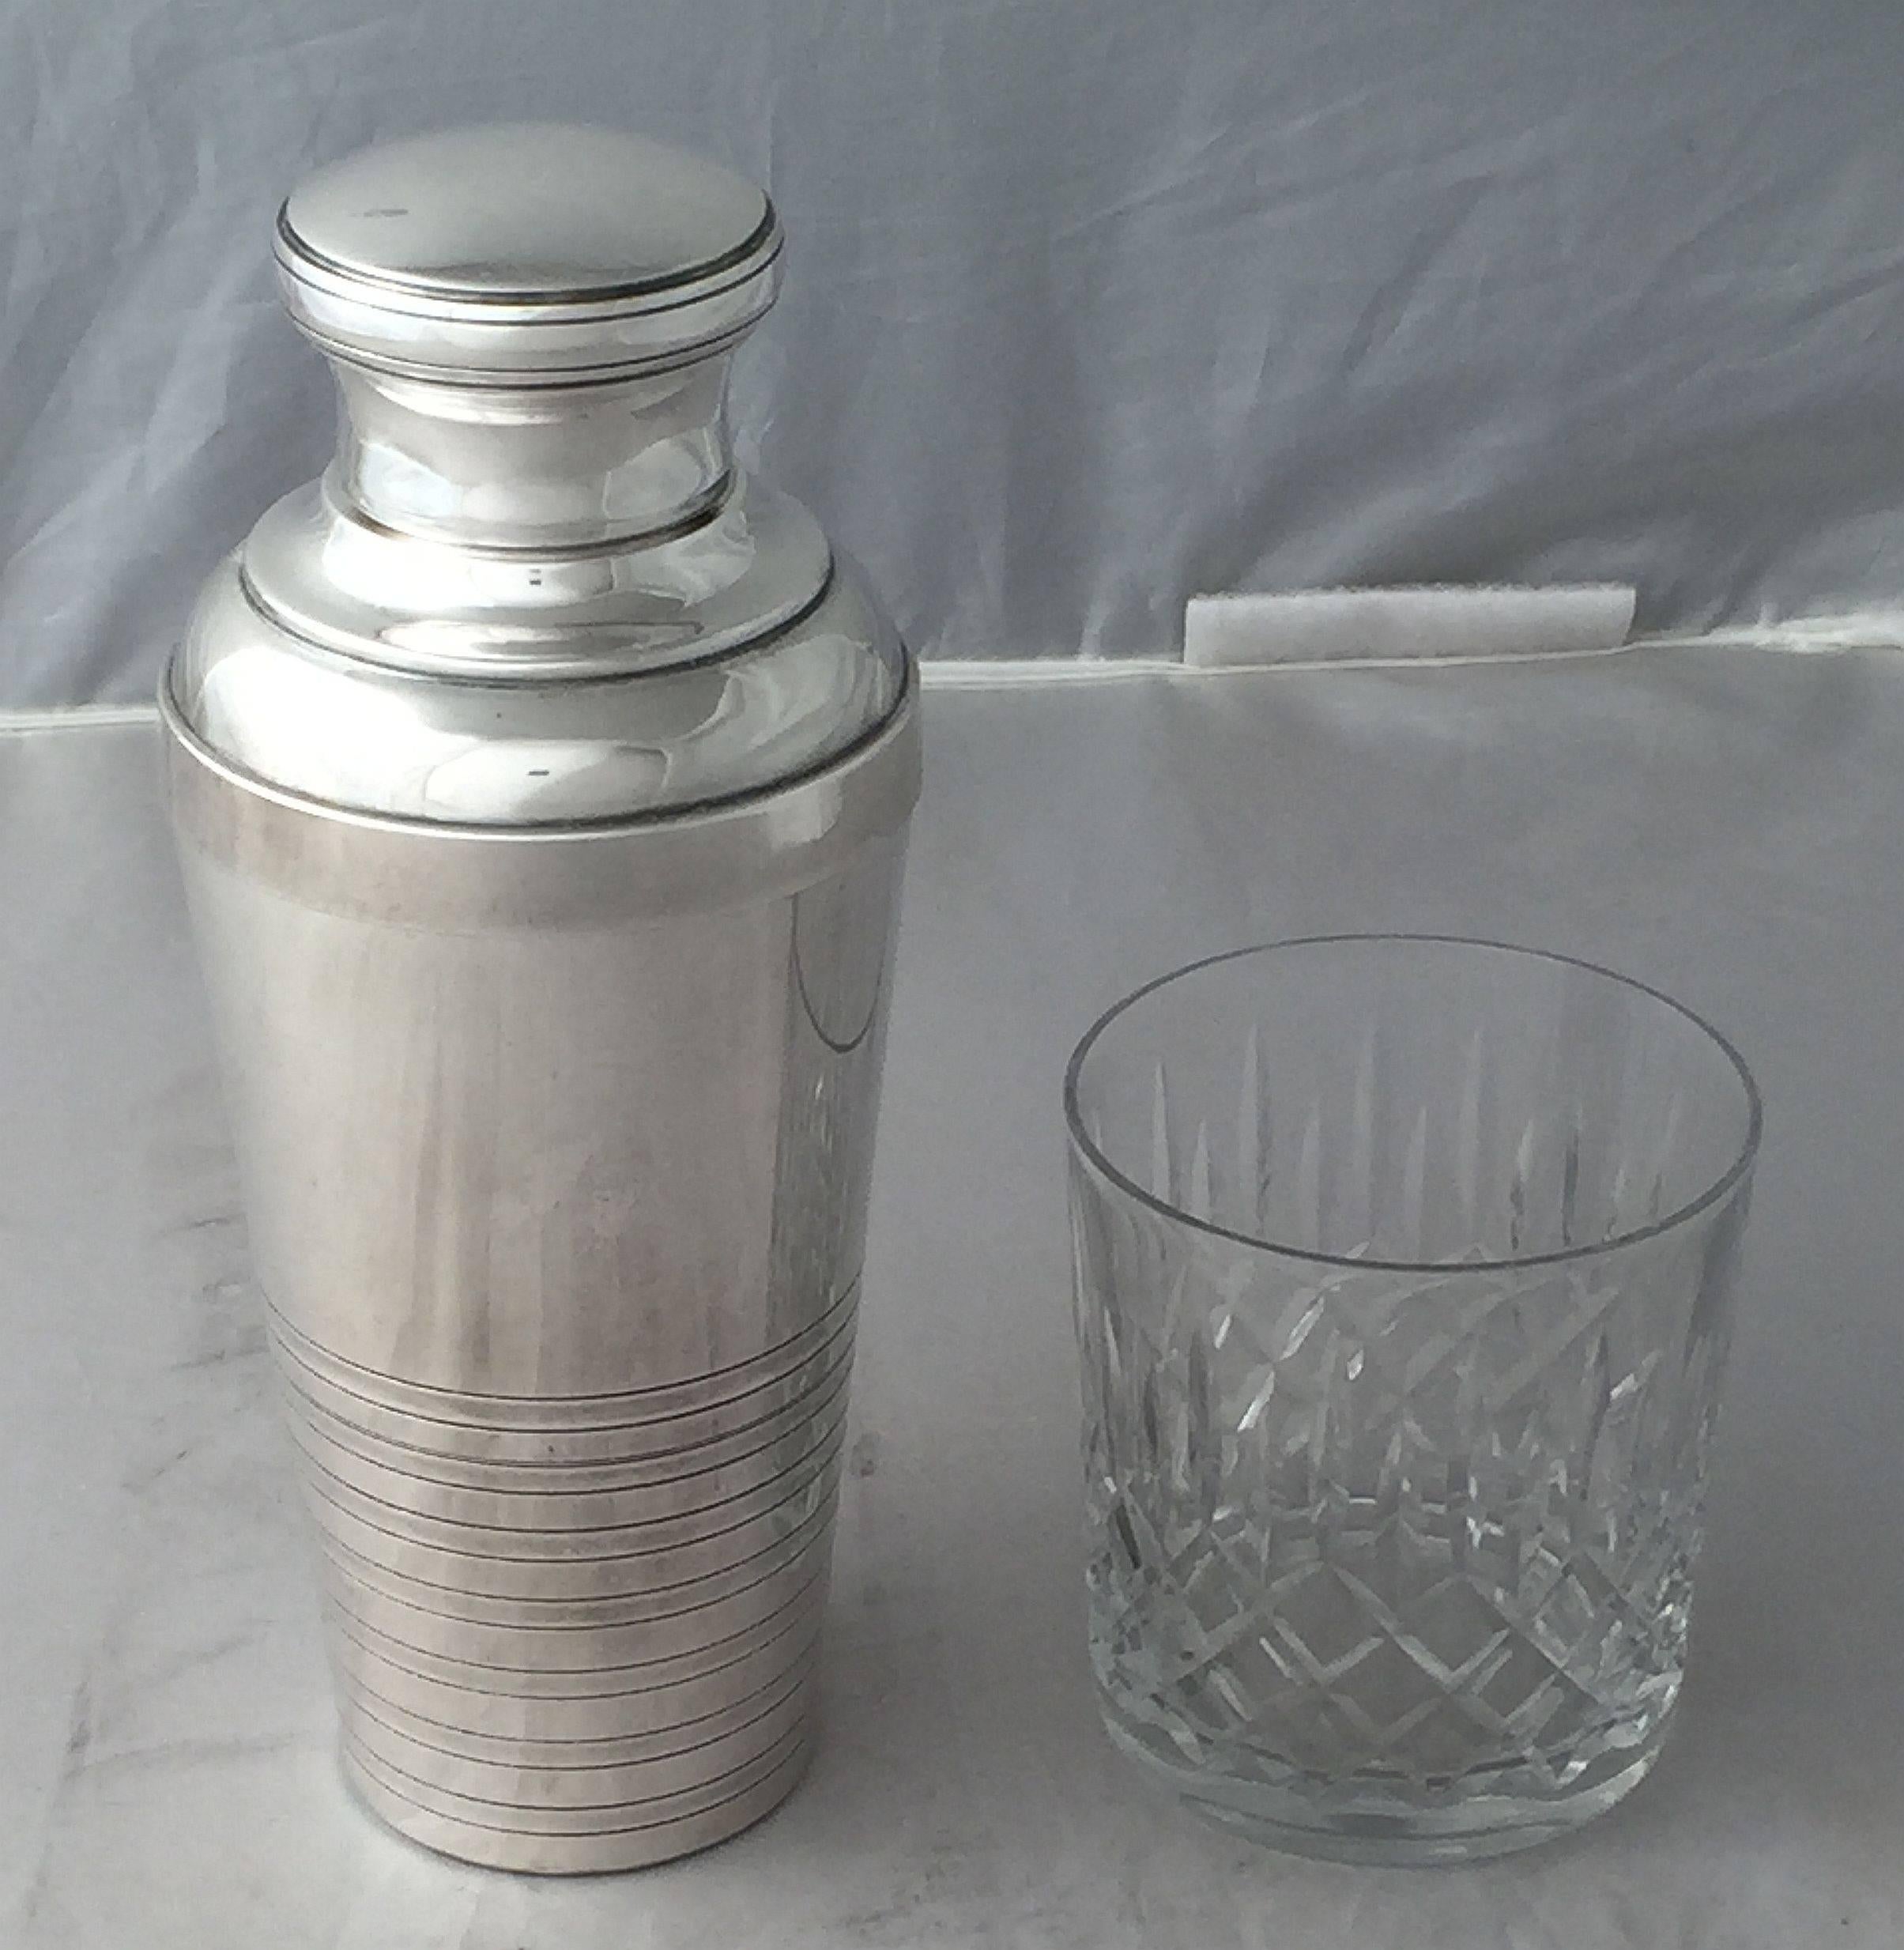 An authentic French cylindrical martini or cocktail shaker of fine plate silver featuring stylish Art Deco design, with removable cap and strainer.

